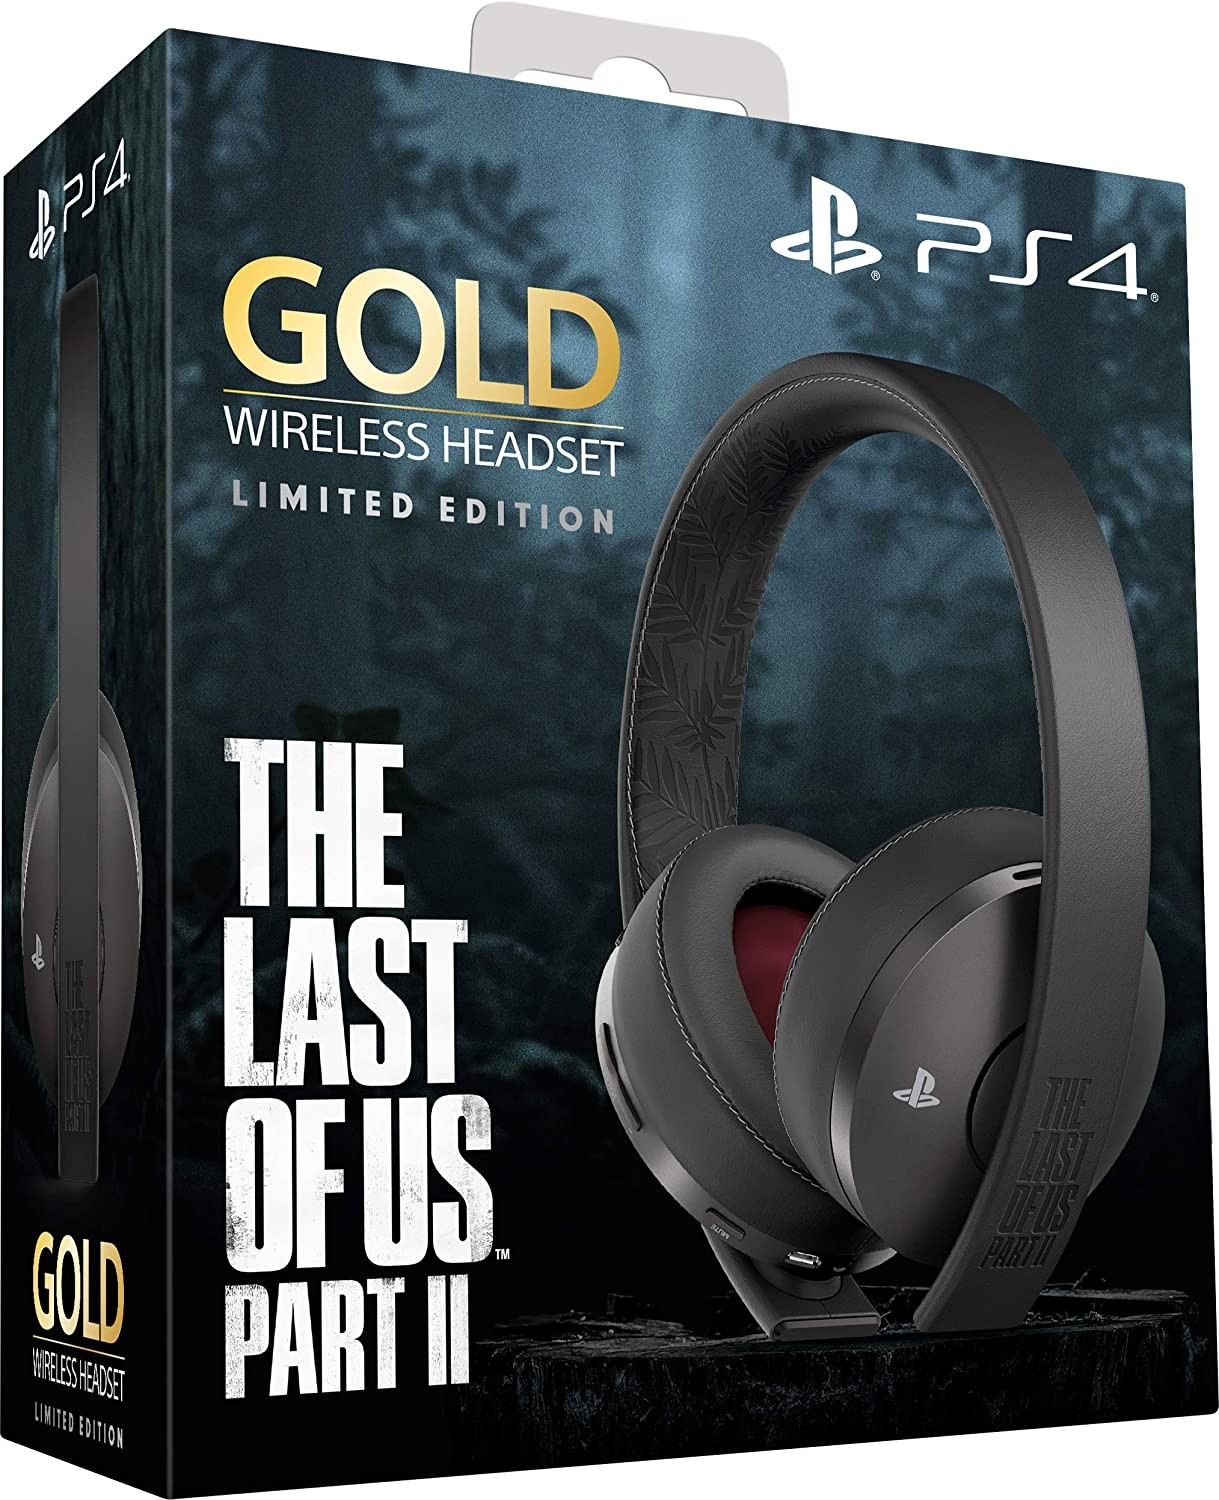 Sony Wireless Gold Headset The Last of Us Part II Limited Edition